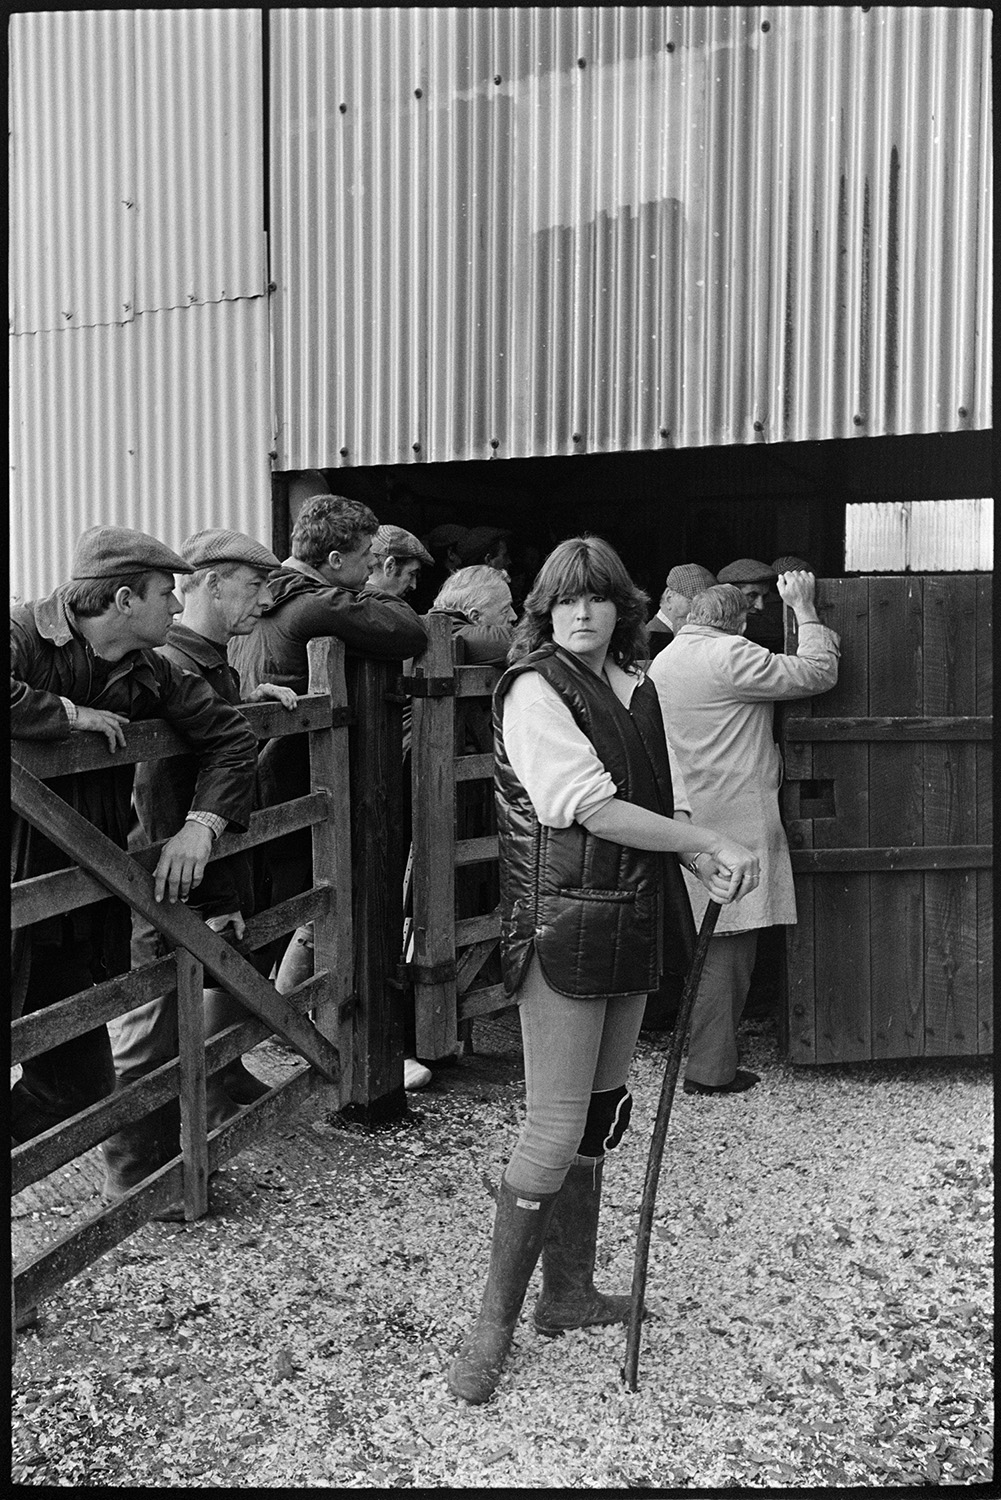 Ring at cattle market, farmers bidding, auctioneers in box. 
[A woman working at a cattle market near Wheddon Cross. Men are looking over a wooden fence in the background to the cattle ring.]